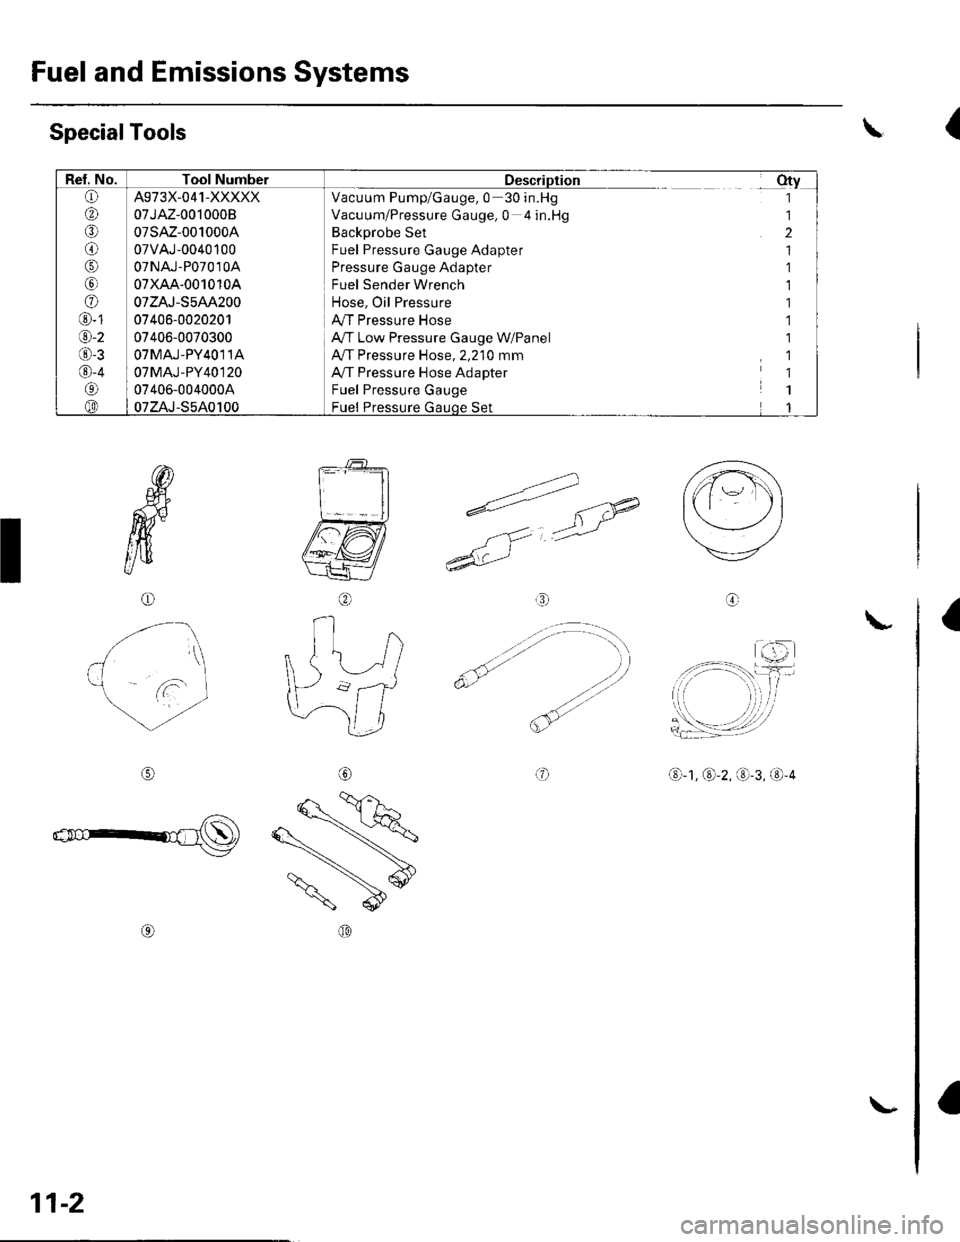 HONDA CIVIC 2003 7.G Workshop Manual Fuel and Emissions Systems
Rel. No.Tool NumberDescriptionotv(L)
@
o
@
@
@
o
@-t
@-2
O-3
@-4
@(iD
A973X-041-XXXXX
07JAZ-0010008
07sAz-001000A
07vAJ-0040100
07NAJ-P07010A
07xAA-001010A
07zAJ-S5AA200
074